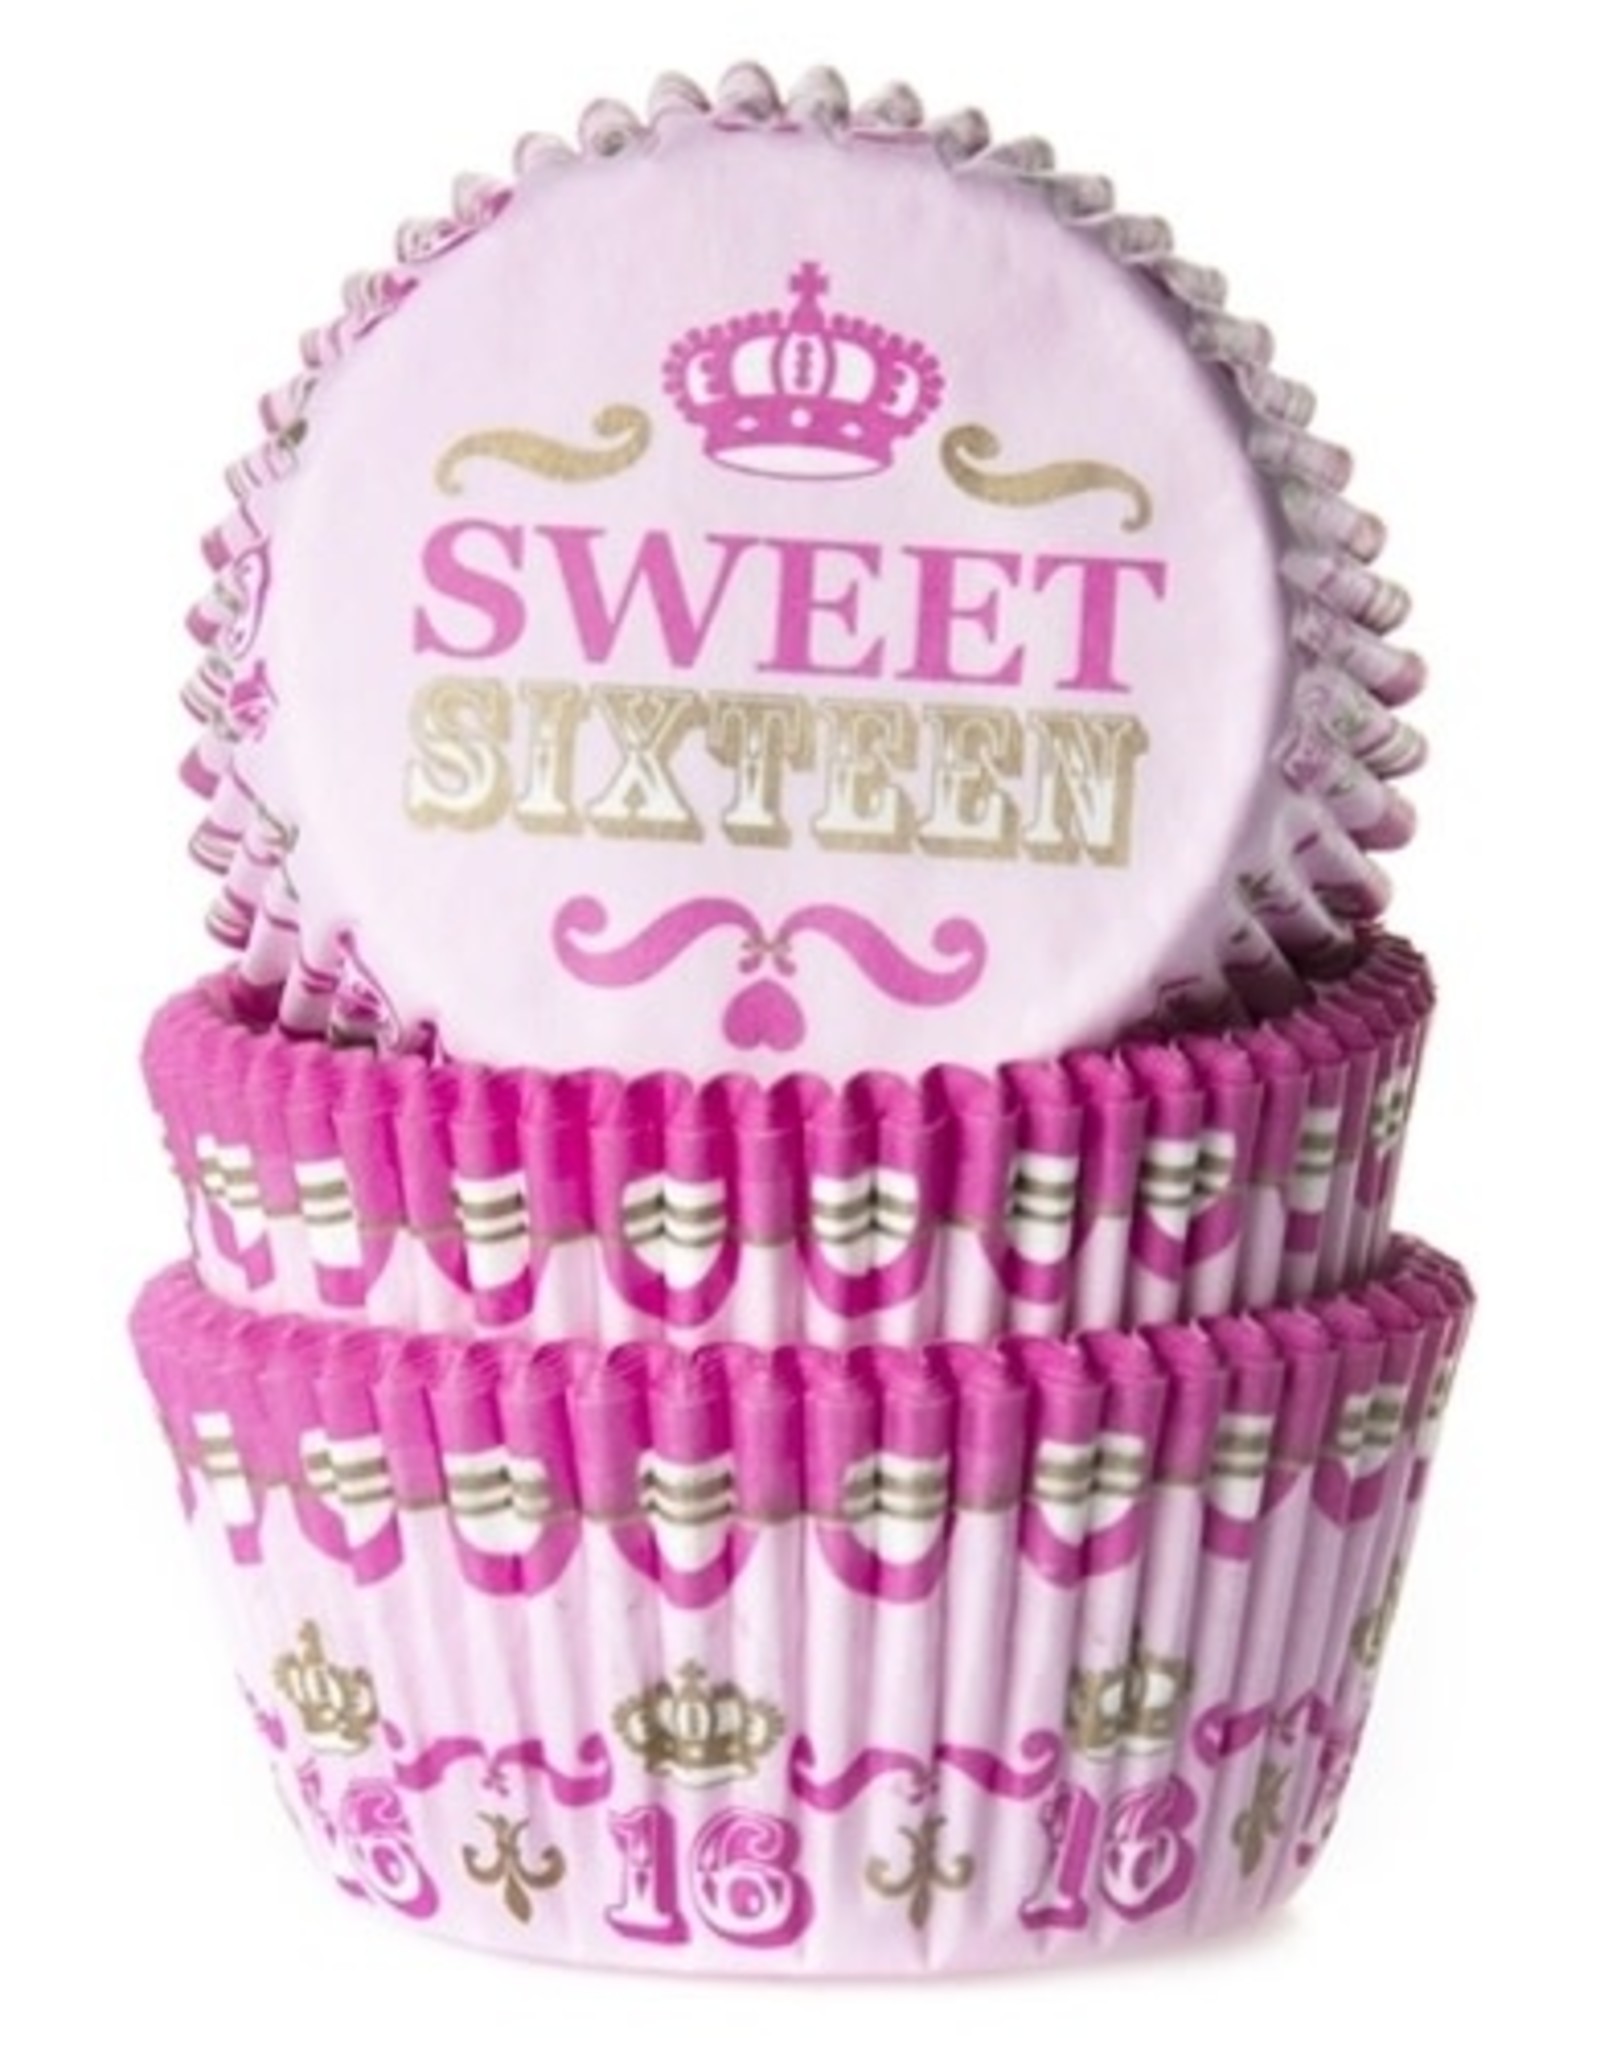 House of Marie House of Marie Baking Cups Sweet Sixteen - pk/50